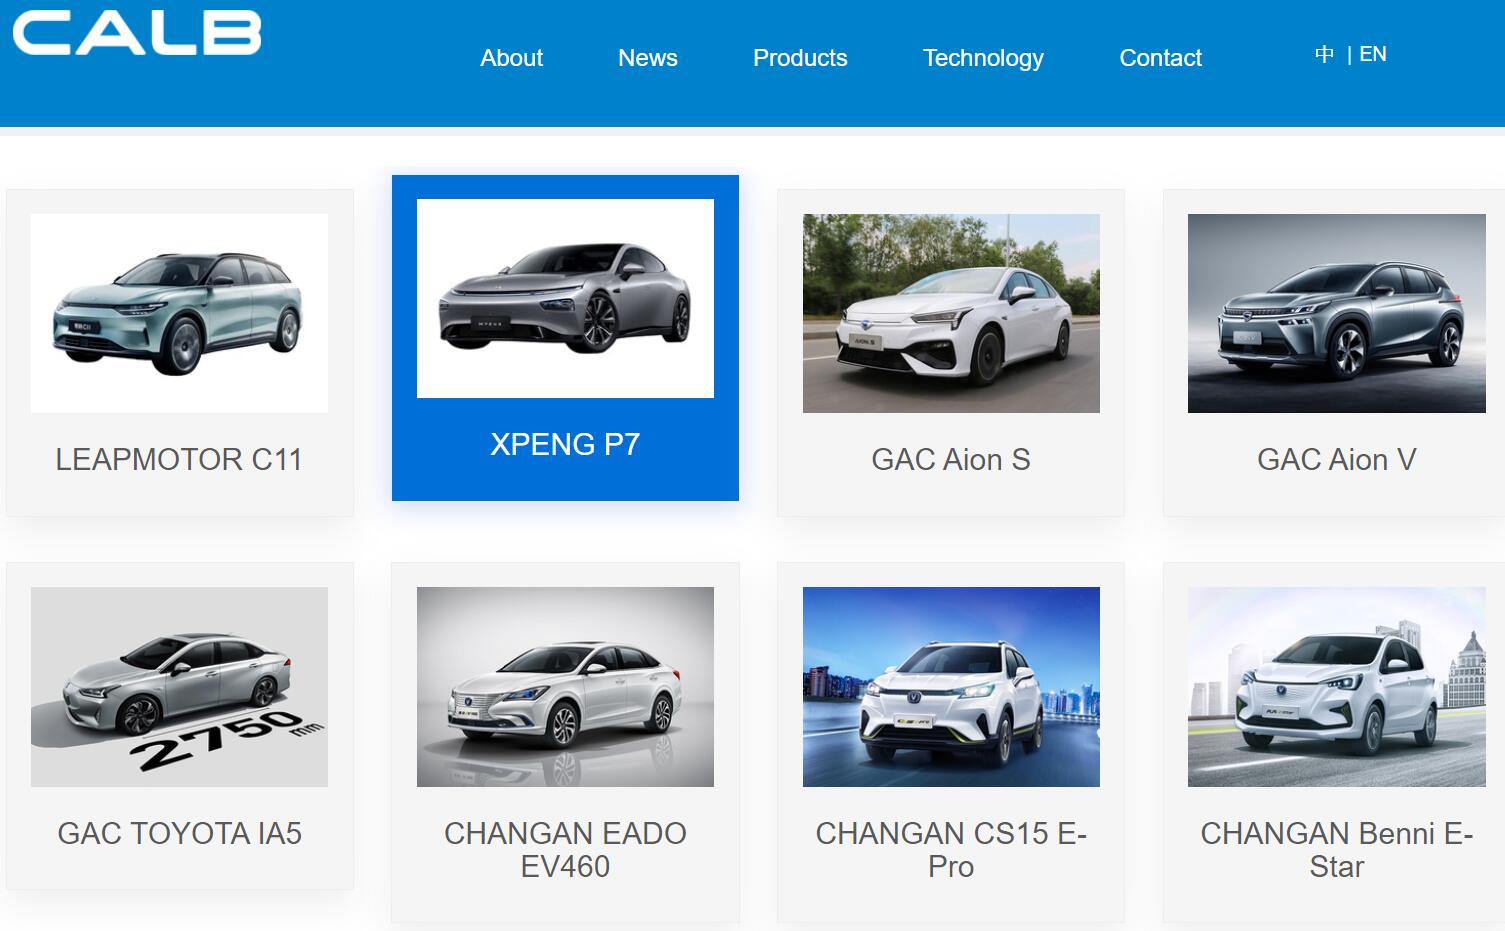 XPeng reportedly to replace CATL with CALB for cost reasons, EV maker responds-CnEVPost